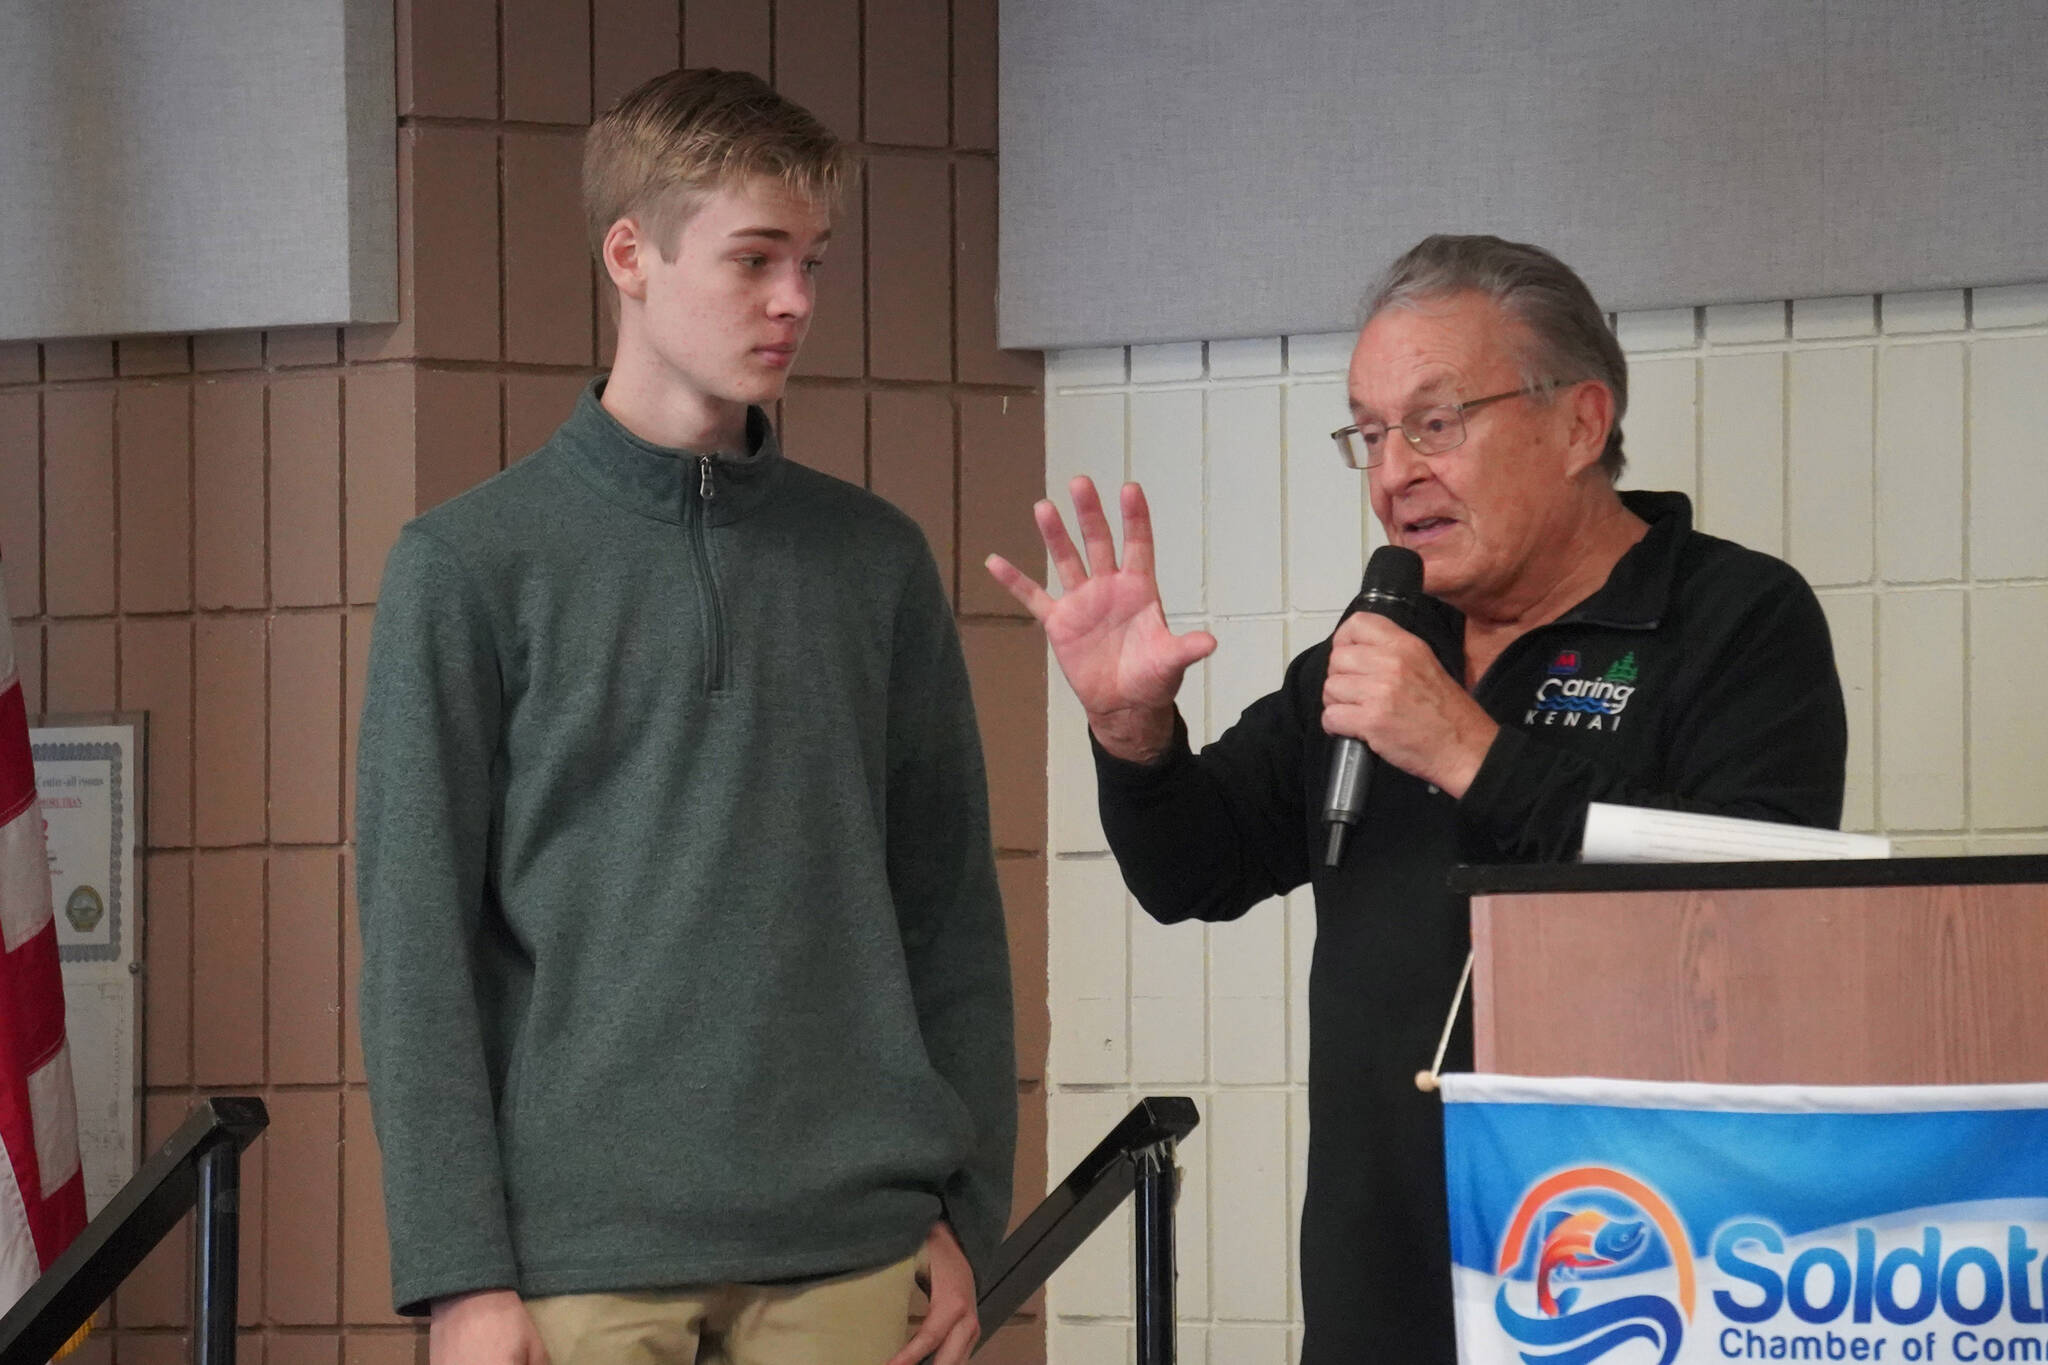 First Place Winner Paxton McKnight, of Cook Inlet Academy, is introduced by Merrill Sikorski at the Caring for the Kenai Awards Celebration held during a Joint Chamber Luncheon on Wednesday, May 3, 2023, at the Soldotna Regional Sports Complex in Soldotna, Alaska. (Jake Dye/Peninsula Clarion)